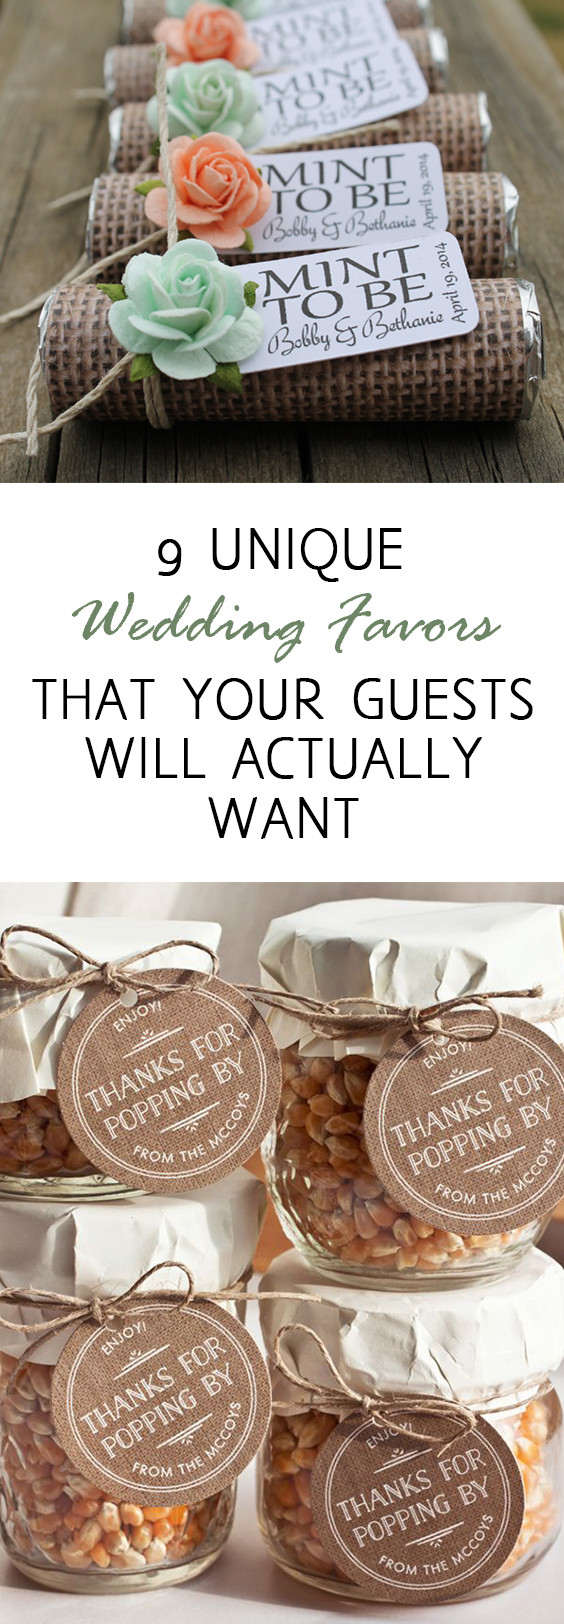 Inexpensive Wedding Favors
 9 Unique Wedding Favors that Your Guests Will Actually